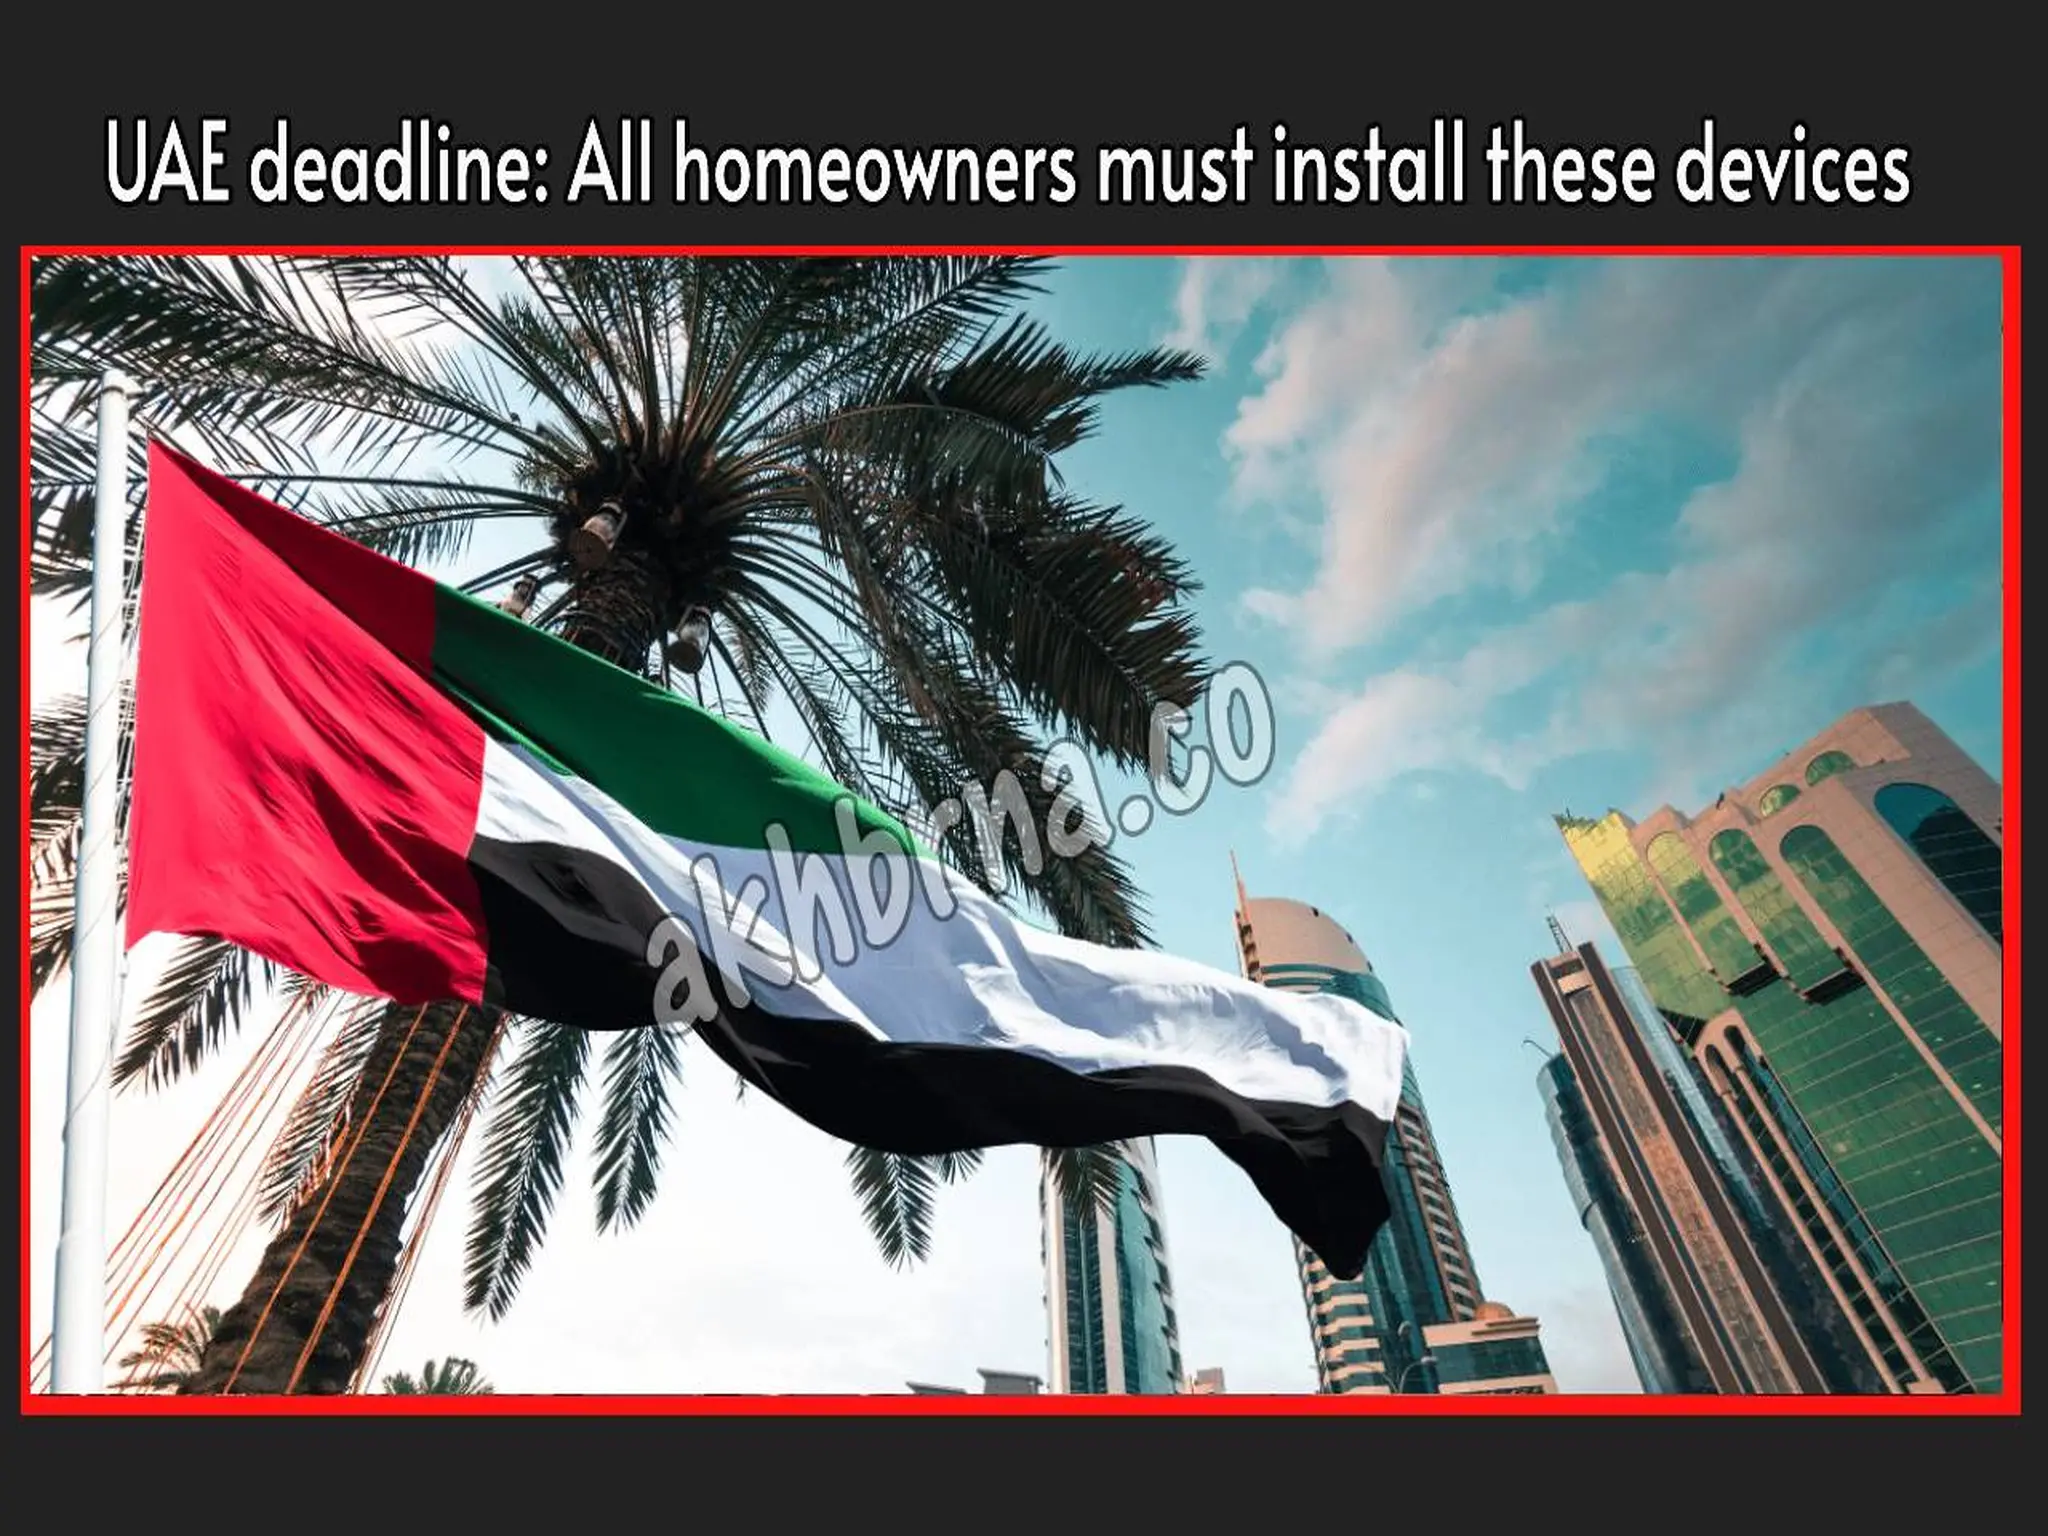 UAE deadline: All homeowners must install these devices